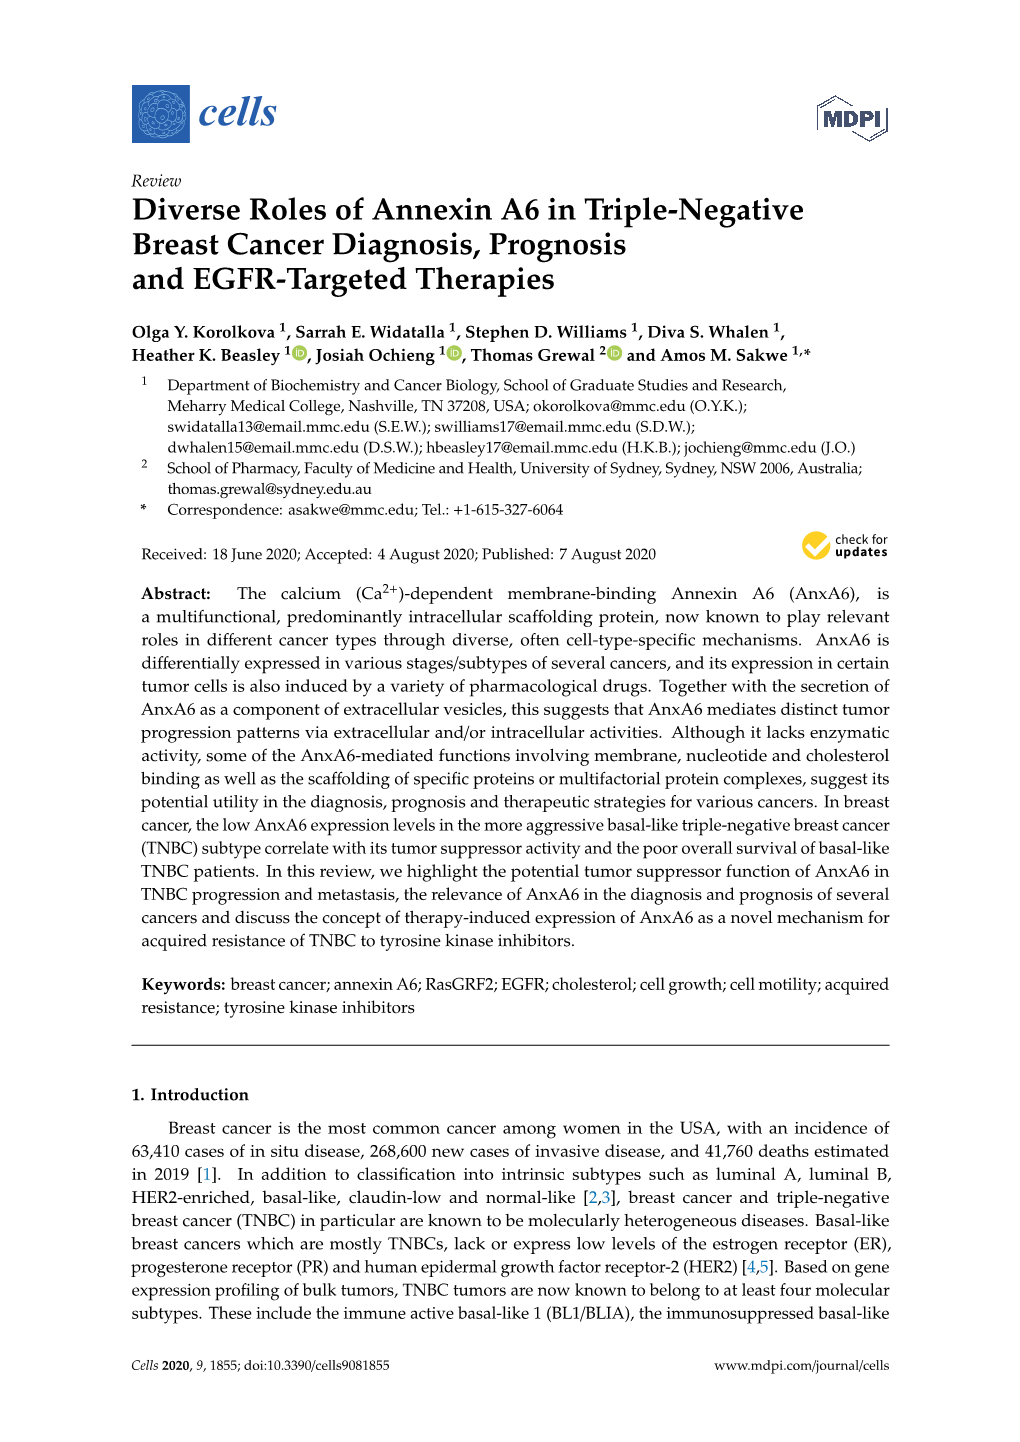 Diverse Roles of Annexin A6 in Triple-Negative Breast Cancer Diagnosis, Prognosis and EGFR-Targeted Therapies